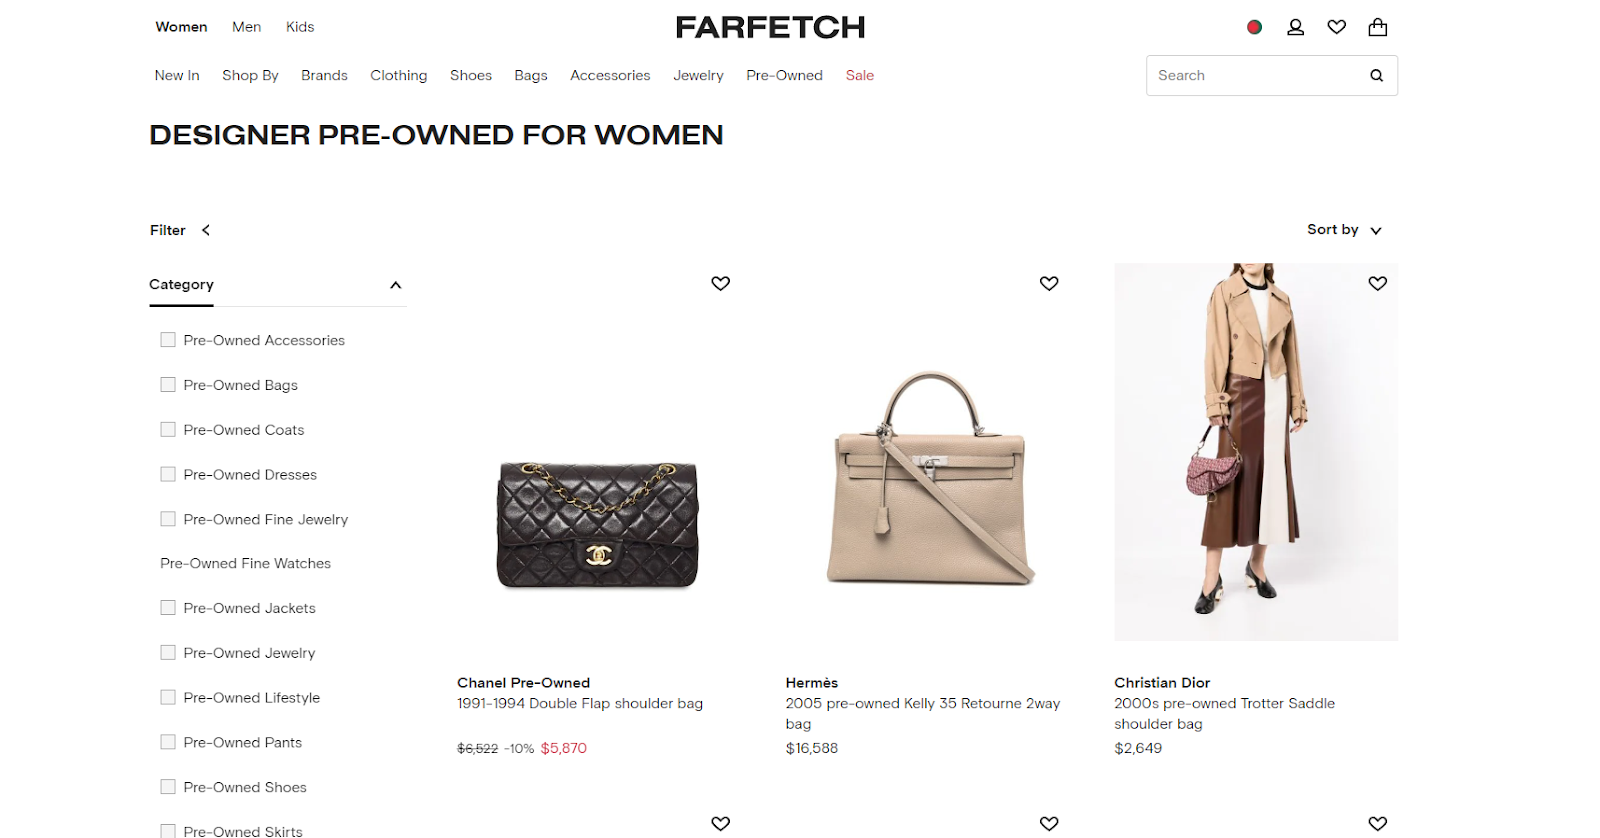 FARFETCH : Read This Before You Buy Something-Cloud Retouch